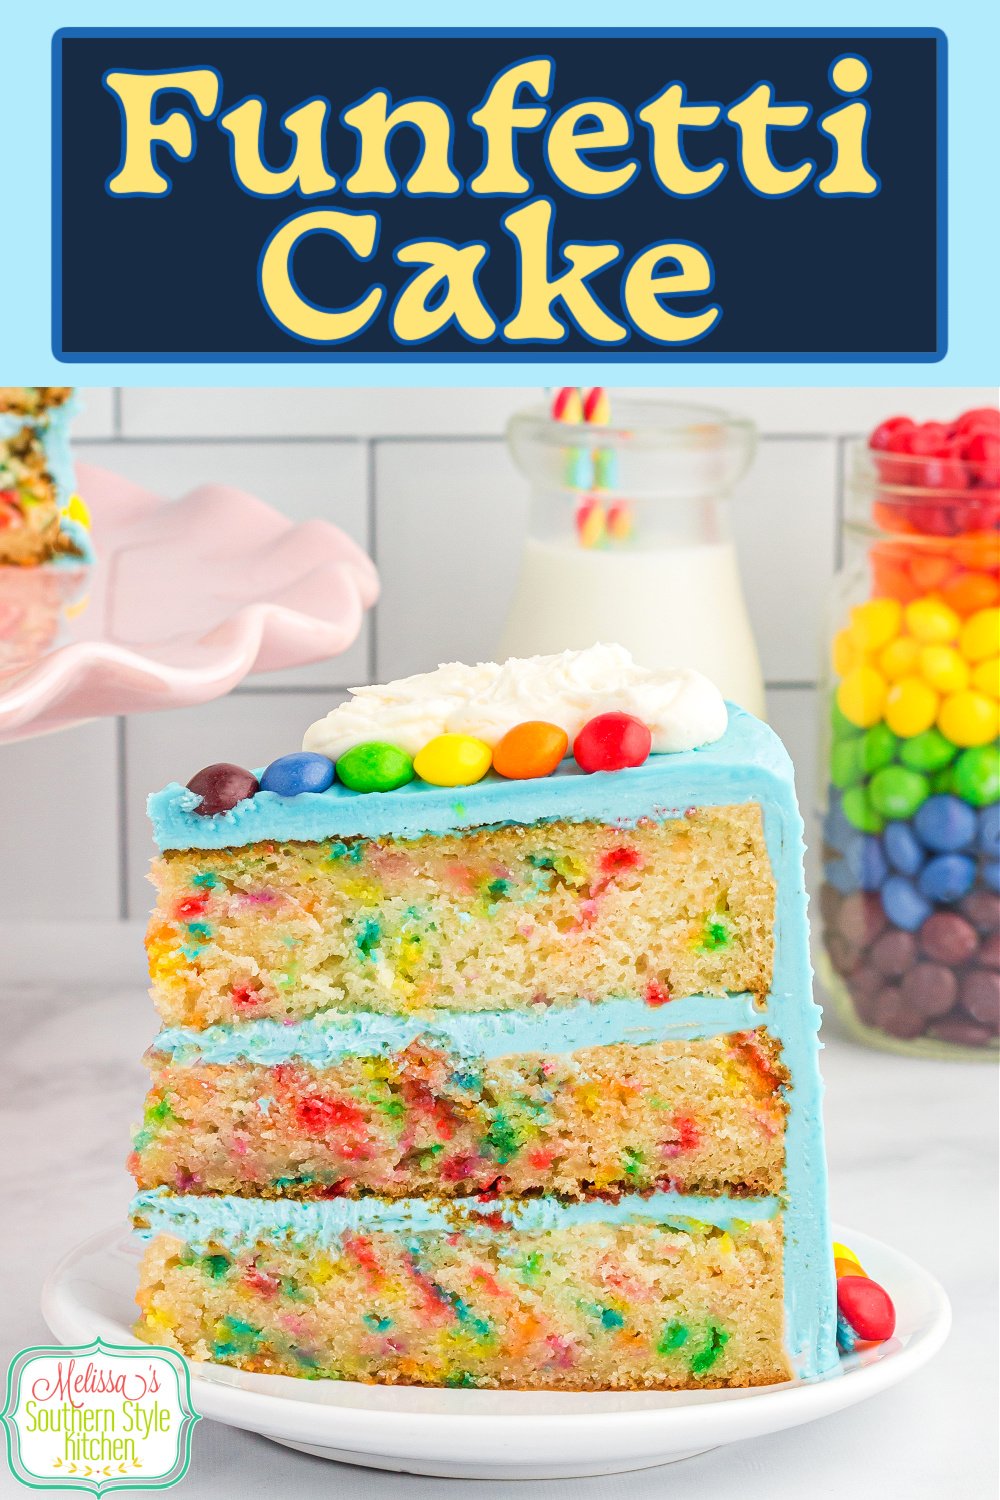 This Funfetti Cake is like a party in your mouth! Serve it for summer picnics, birthday parties, St Patrick's Day and more. #funfetticake #birthdaycake #sprinkles #rainbowcake #partyfood #cakes #cakerecipes via @melissasssk